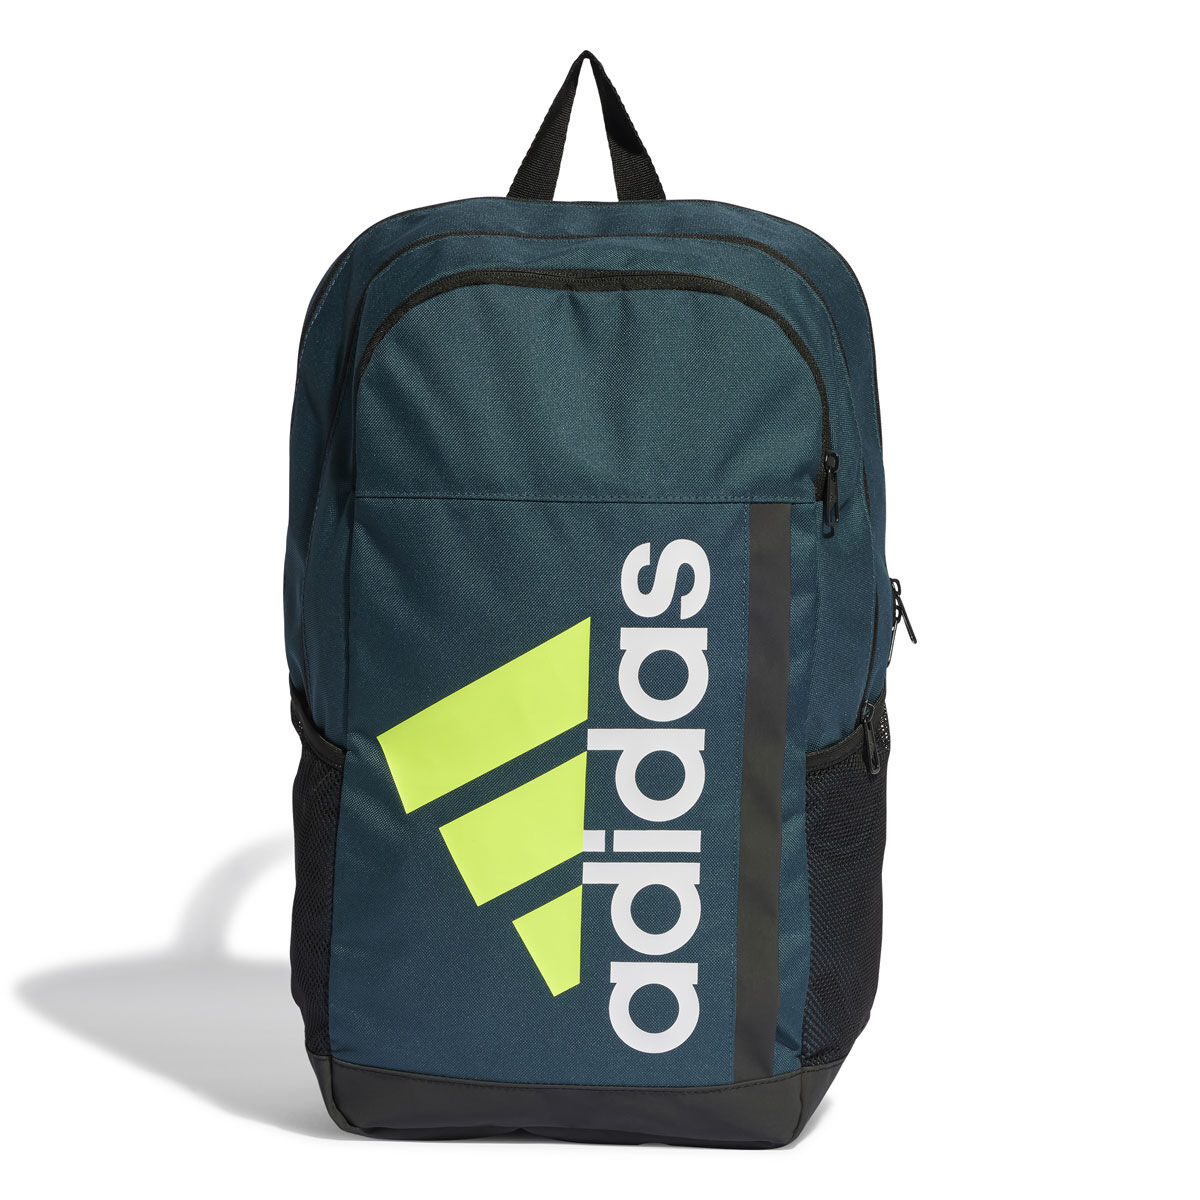 Men's Blue adidas Backpacks: 47 Items in Stock | Stylight